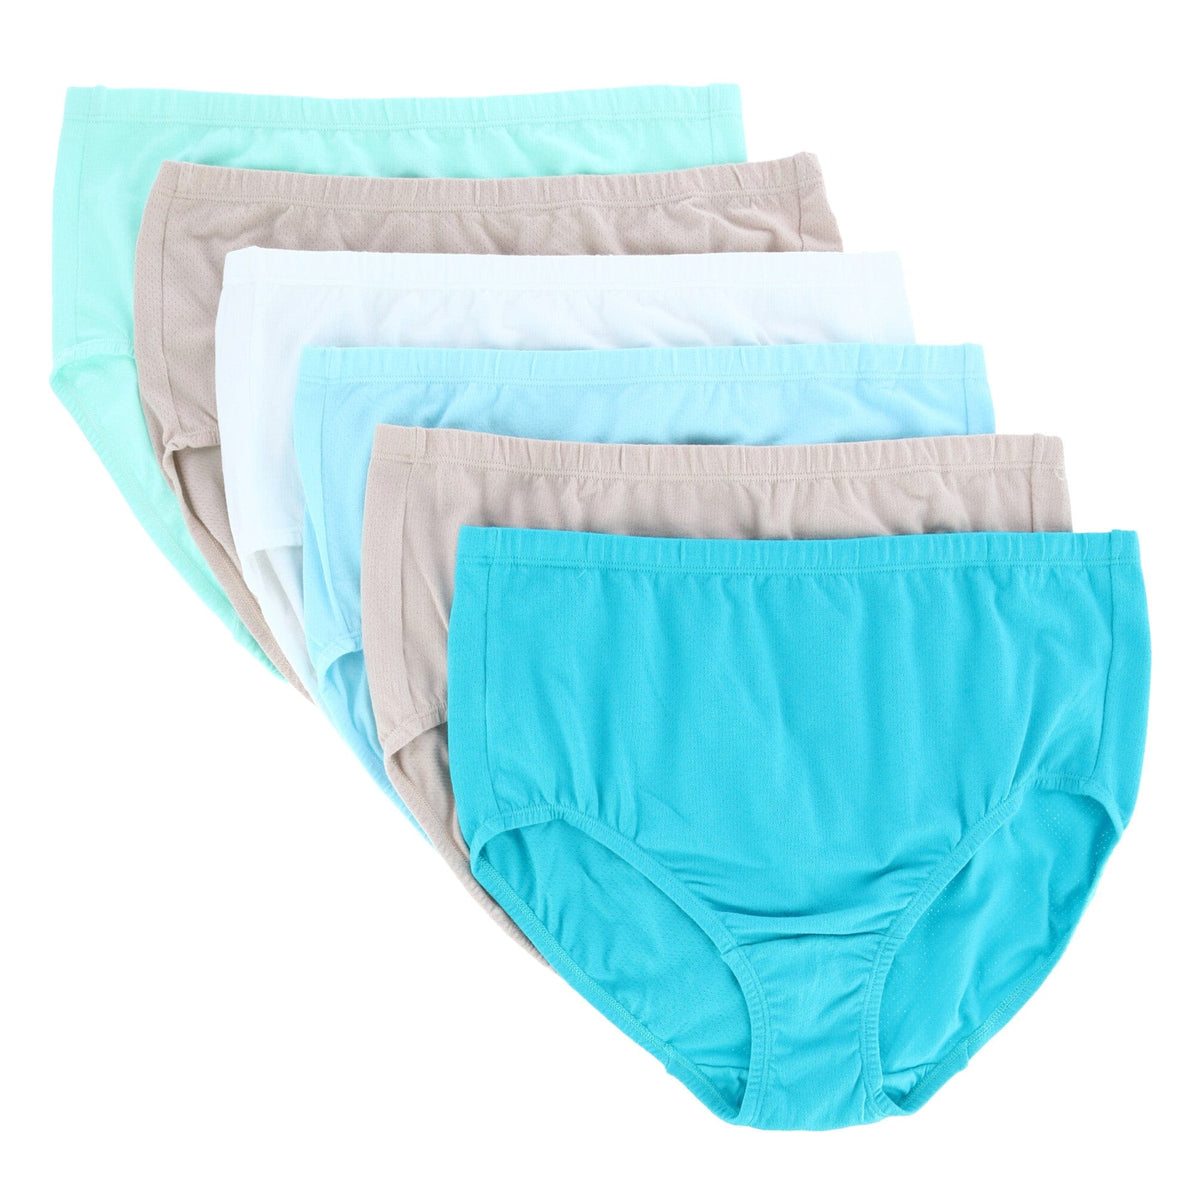 Women's Plus Size Cotton-Mesh Brief Underwear (6 Pack) by Fruit of the Loom